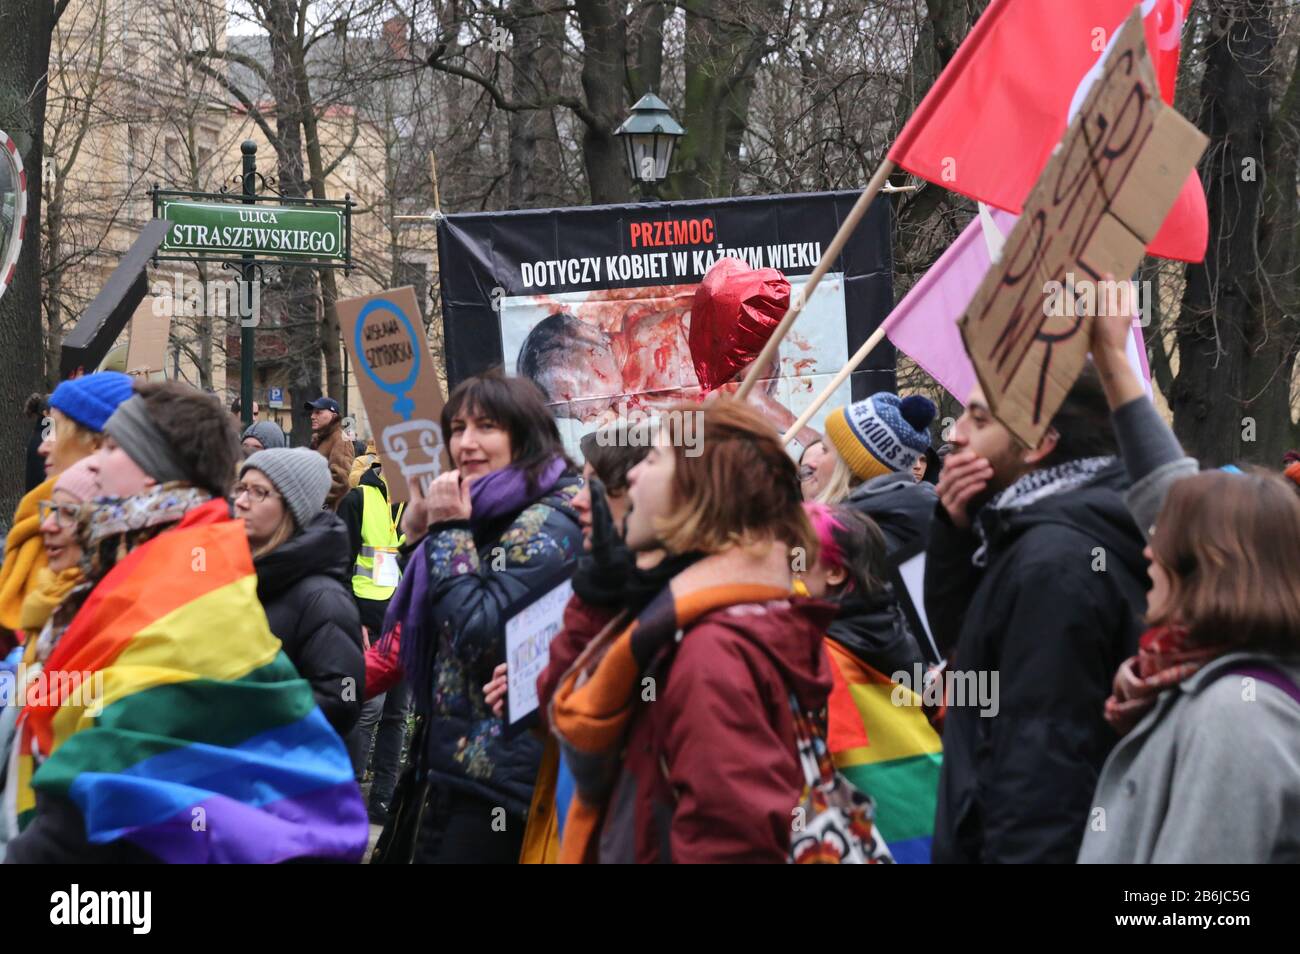 Cracow. Krakow. Poland. Manifa. Women demonstrate for equal rights on International Women's Day. Graphic anti-choice banners in the background. Stock Photo